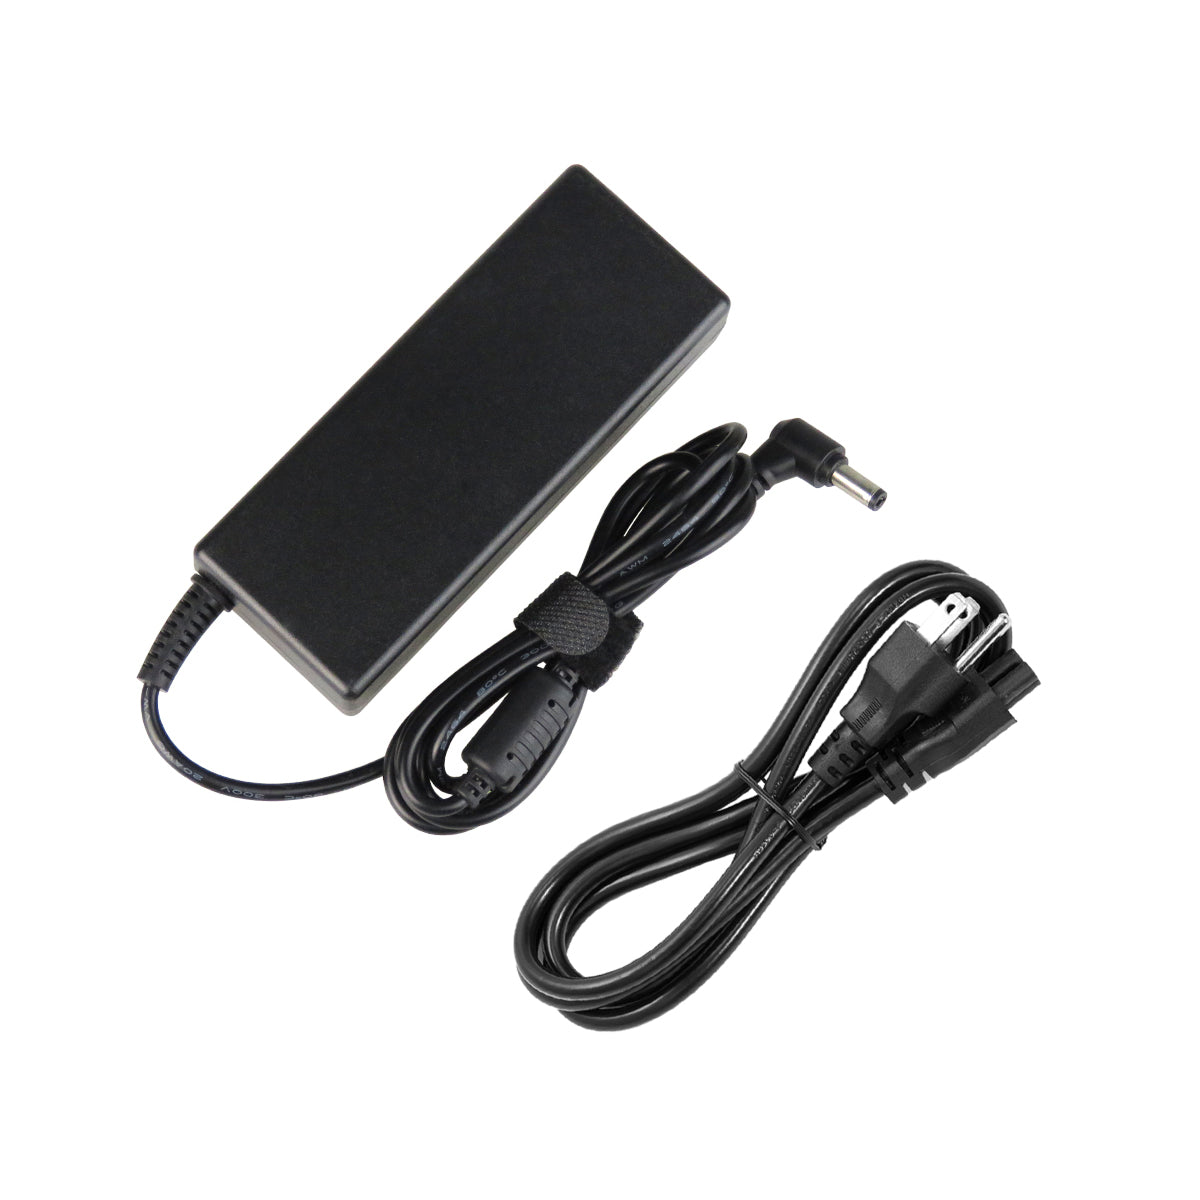 AC Adapter Charger for ASUS U53F Notebook.